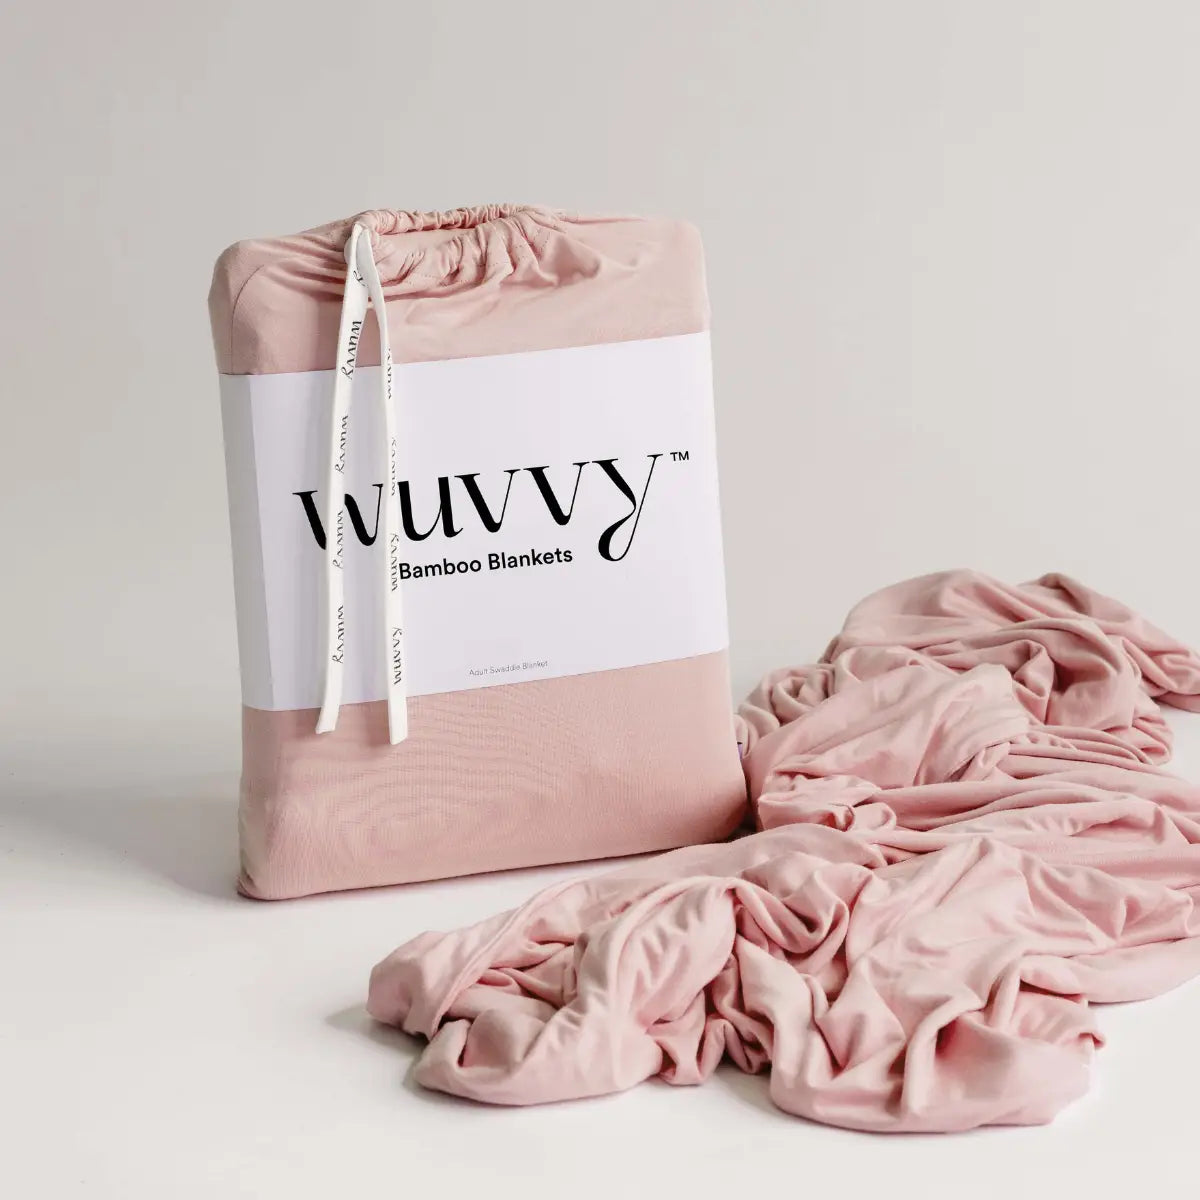 Wuvvy Small Bamboo Swaddle Blanket